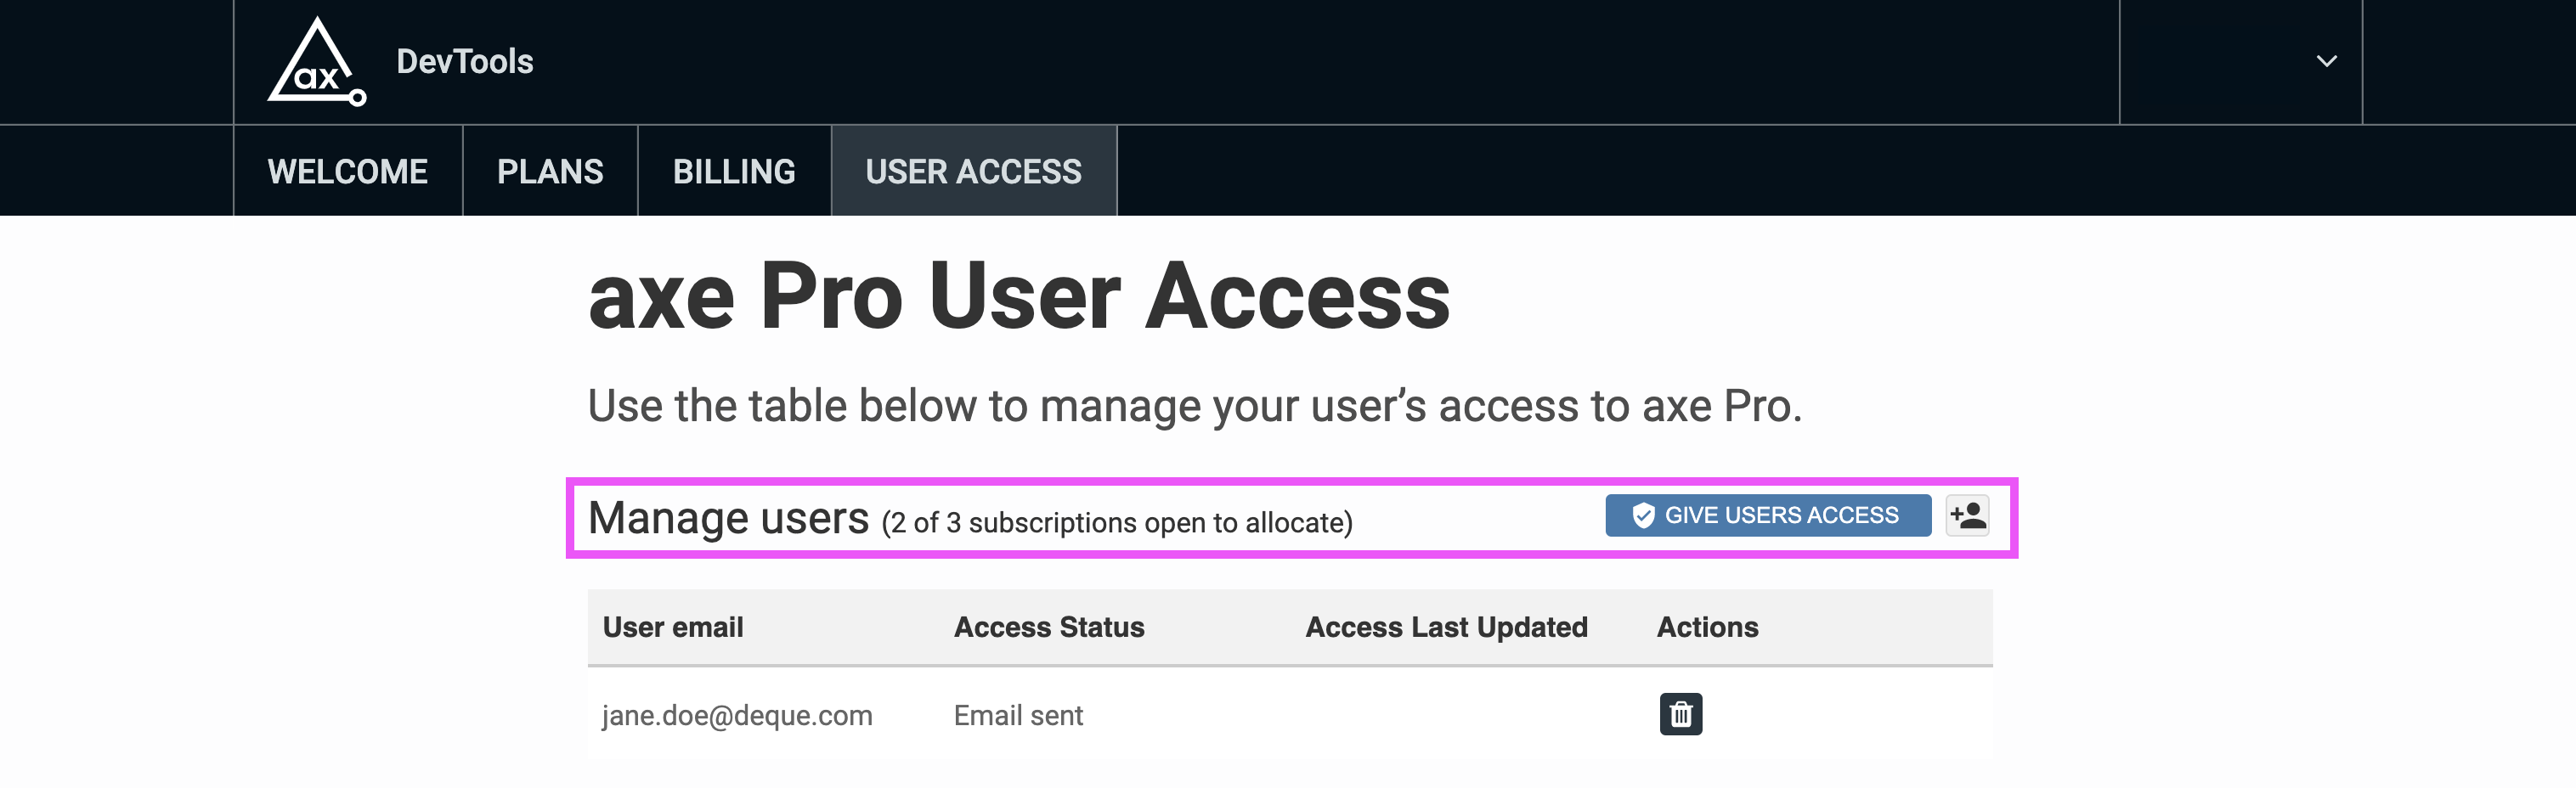 Screenshot of axe.deque.com new 'User Access' tab where you can manage and provision users.